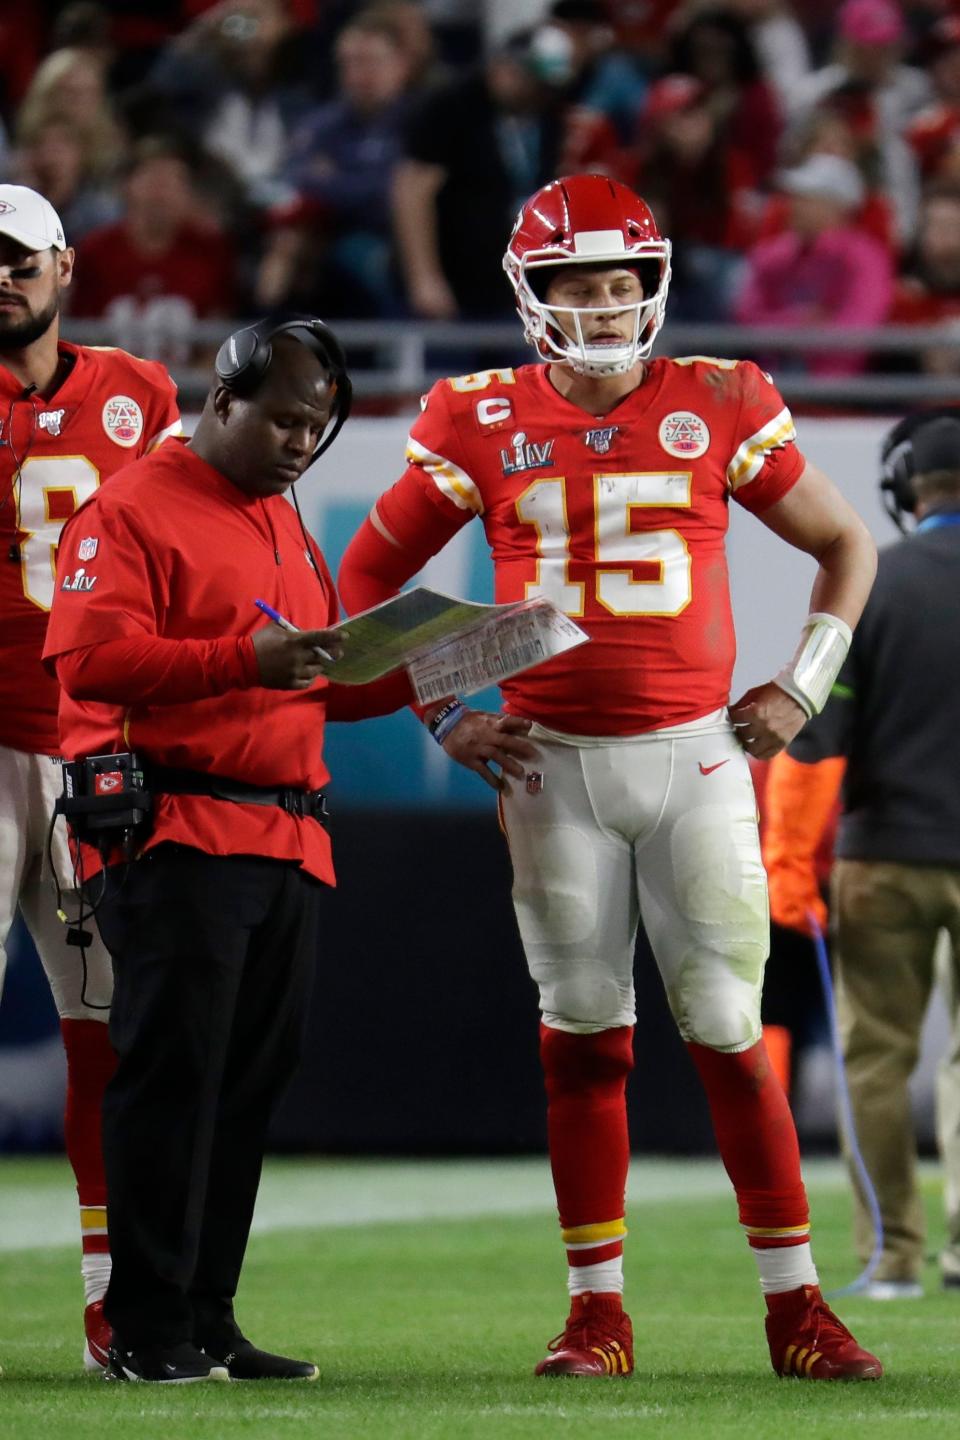 Kansas City Chiefs quarterback Patrick Mahomes (15) speaks with offensive coordinator Eric Bieniemy during the second half of the NFL Super Bowl 54 football game against the San Francisco 49ers, Sunday, Feb. 2, 2020, in Miami Gardens, Fla. (AP Photo/Lynne Sladky)